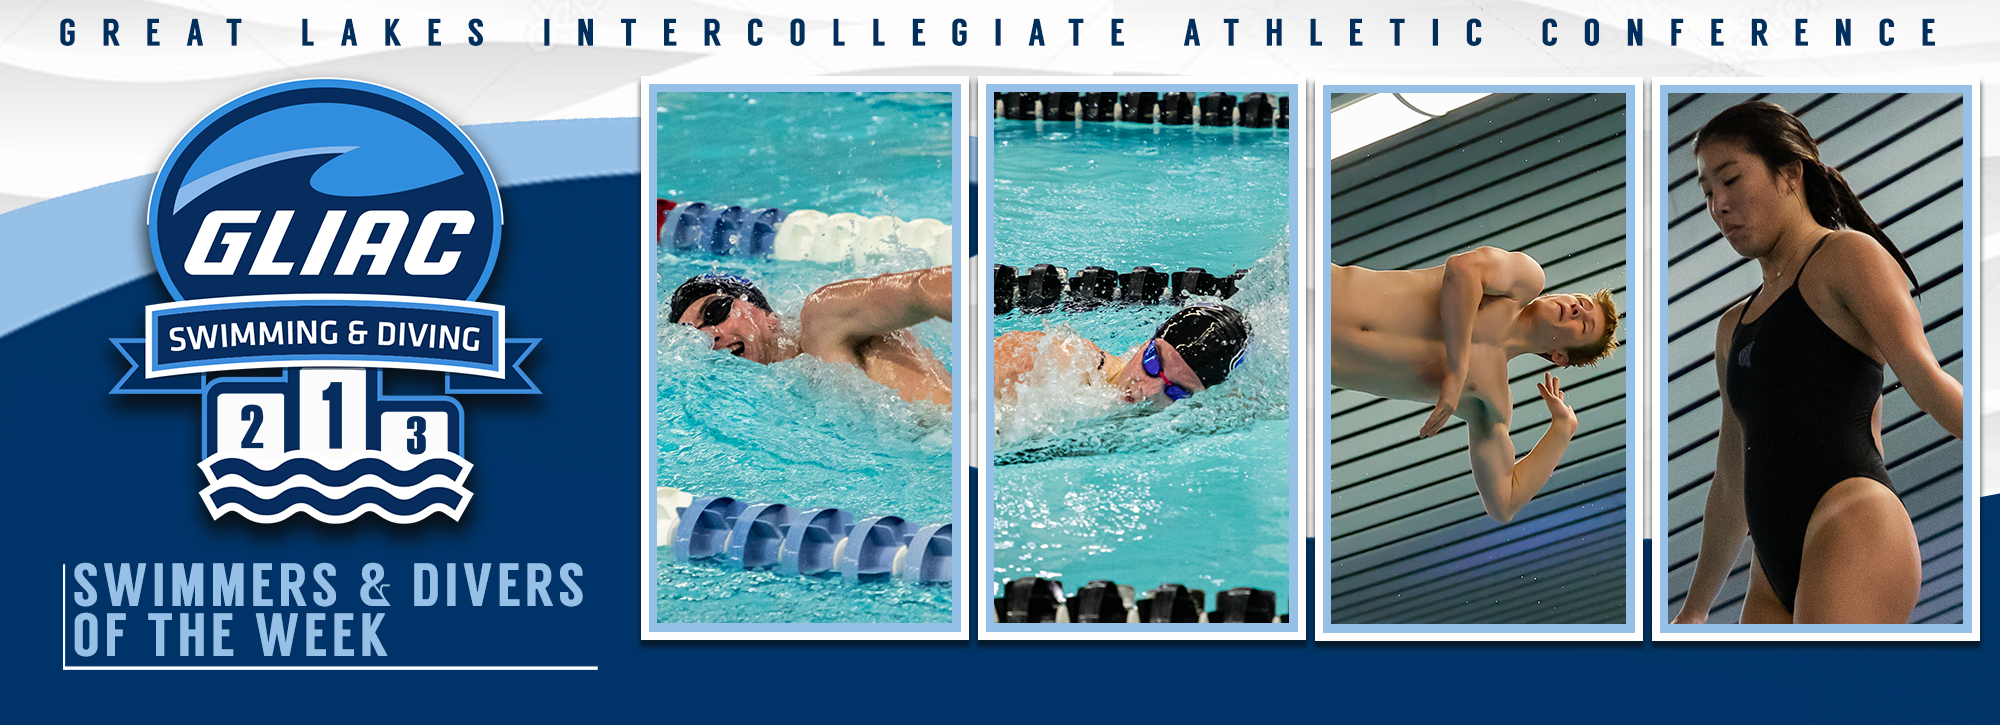 GLIAC reveals swimmers and divers of the week